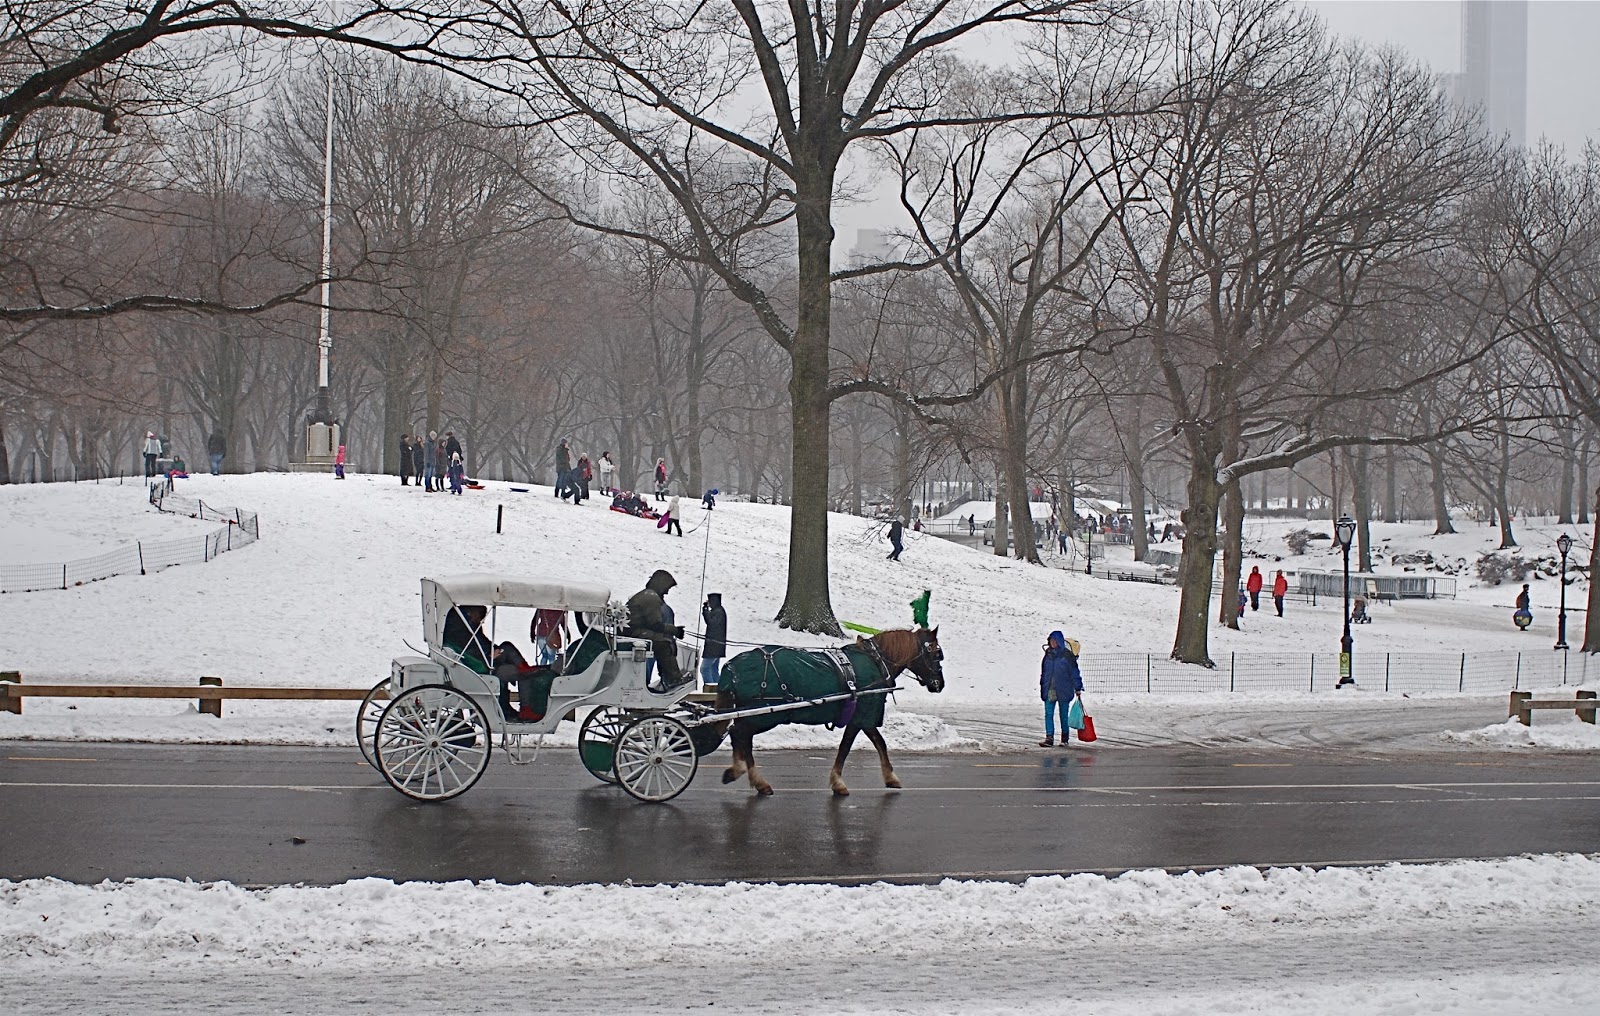 NYC ♥ NYC: Iconic Horse-Drawn Carriage Rides in Central Park